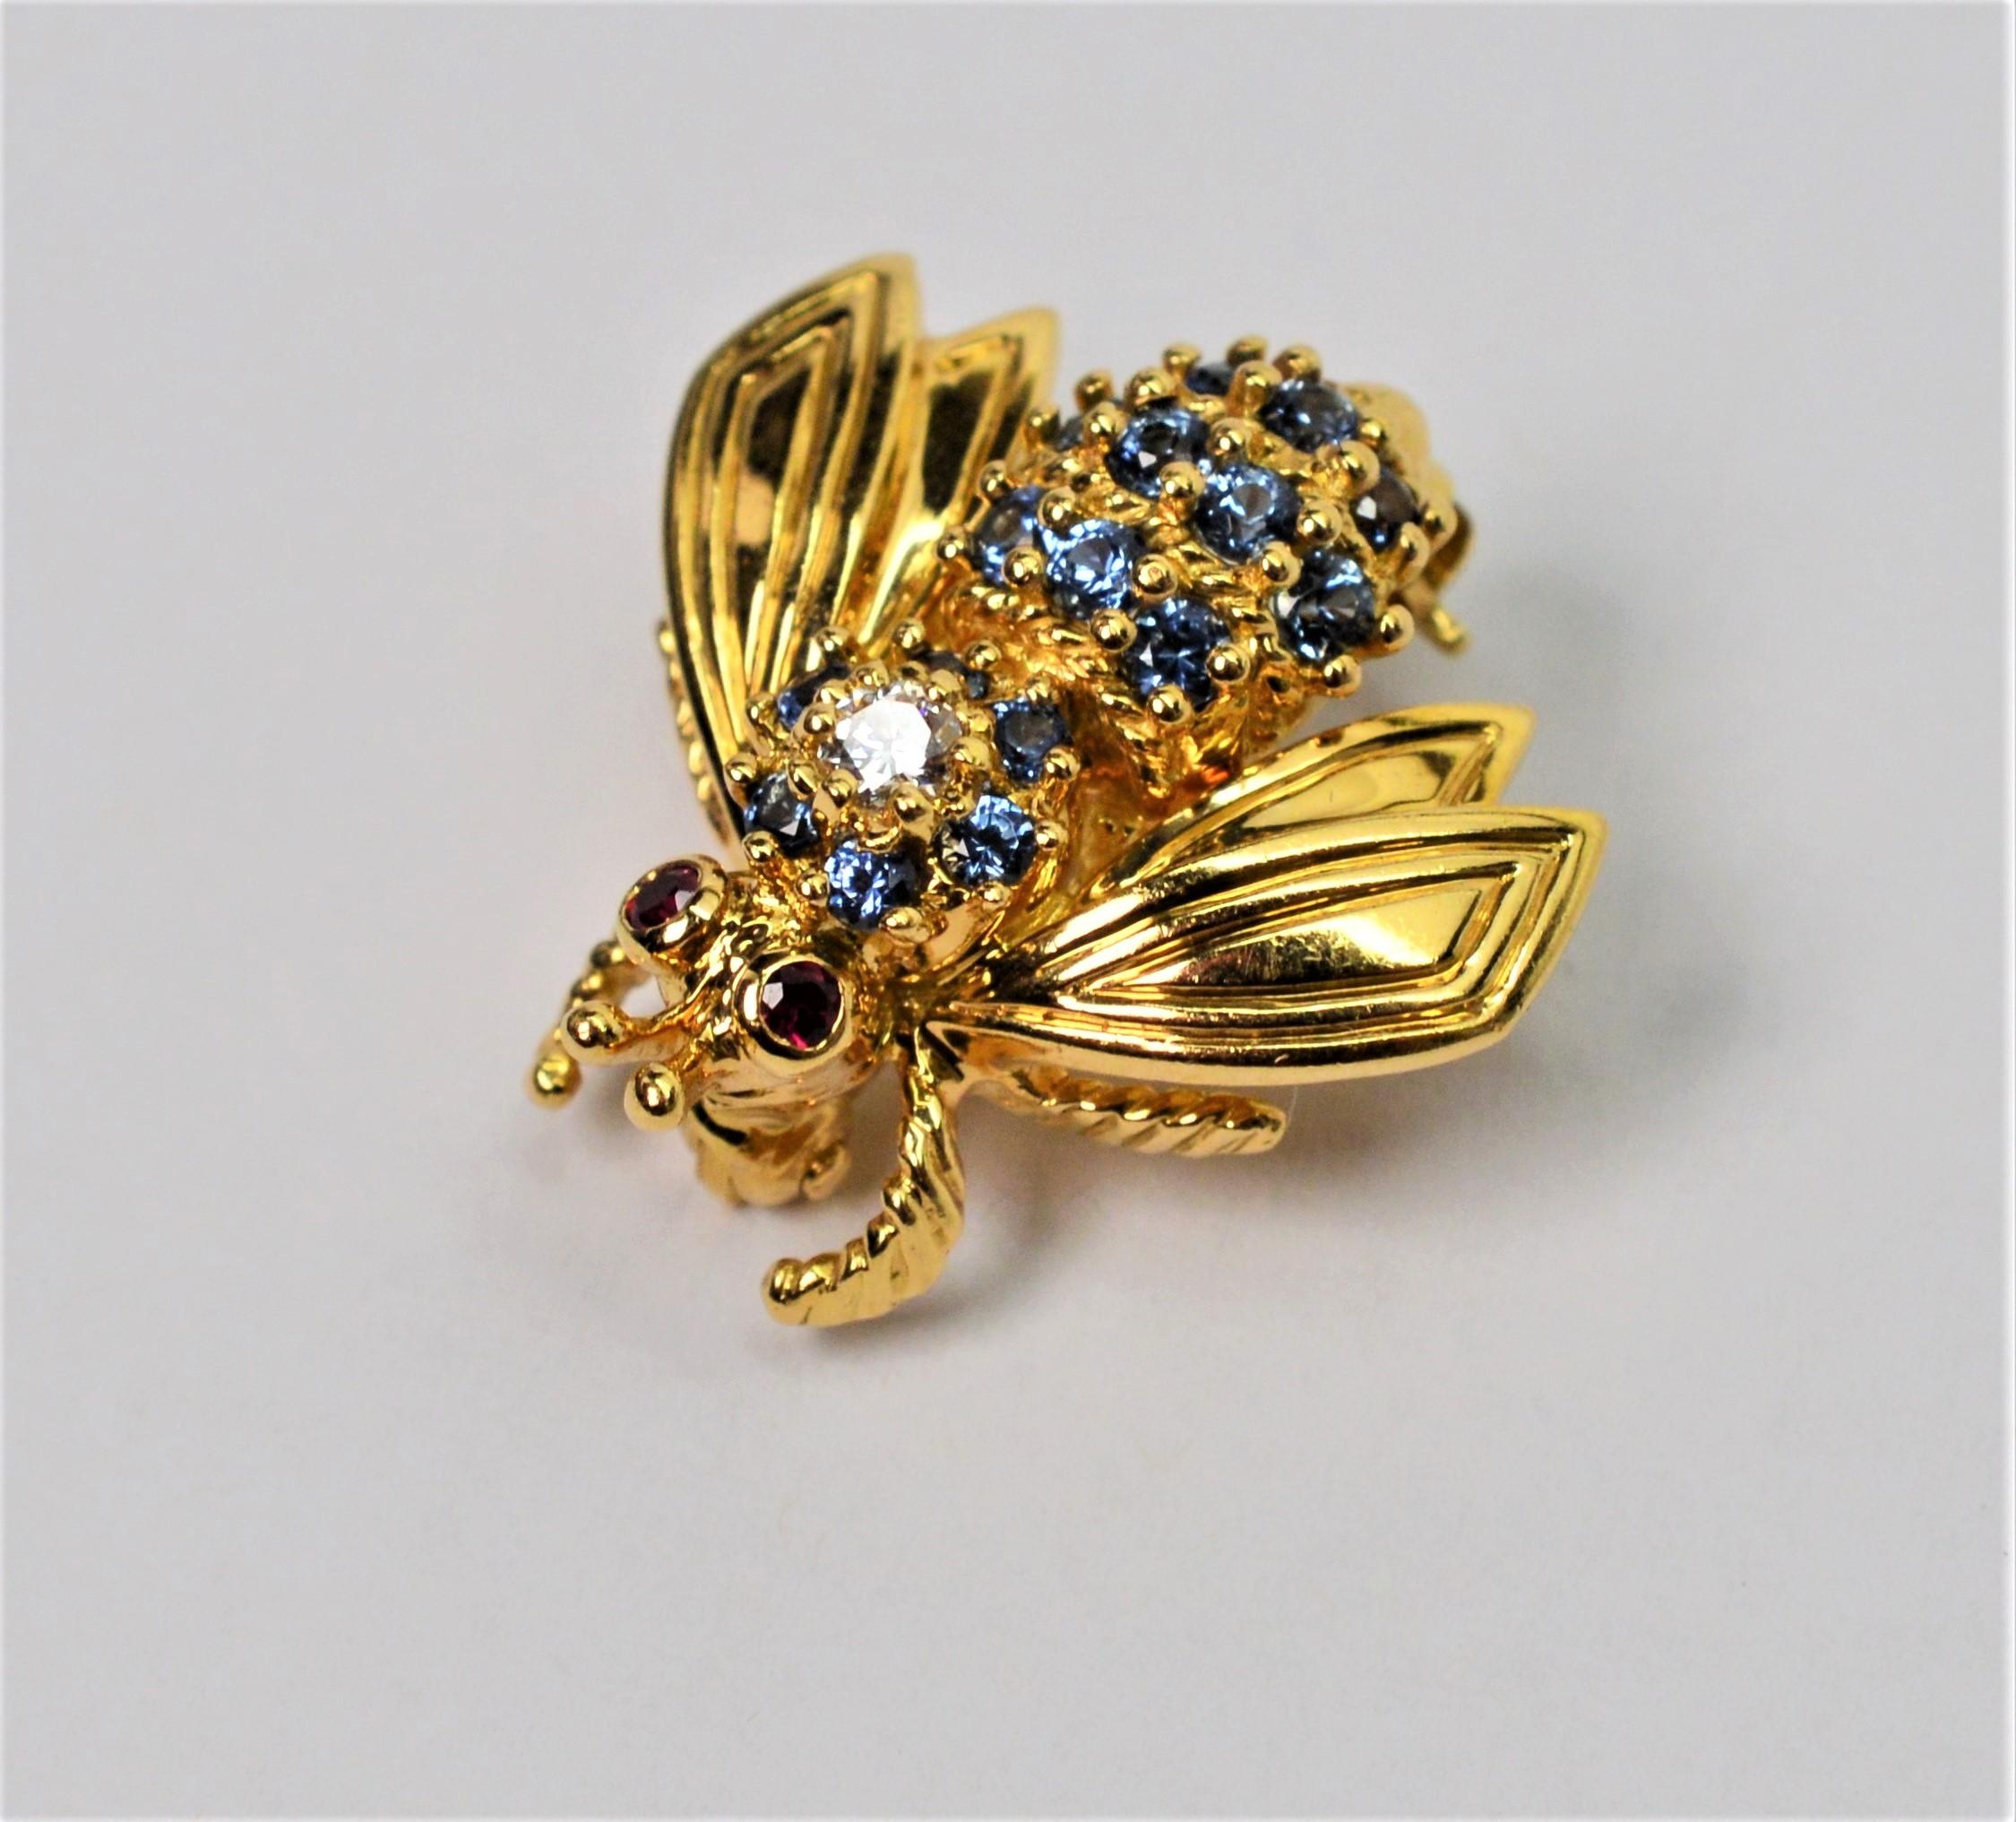 Charming and collectable by Tiffany & Company. This adorable Bee Pin Brooch in bright eighteen karat yellow gold 18k is adorned with sixteen blue sapphires and crowned with one .05 carat white diamond along the body and tiny ruby eyes. Our little